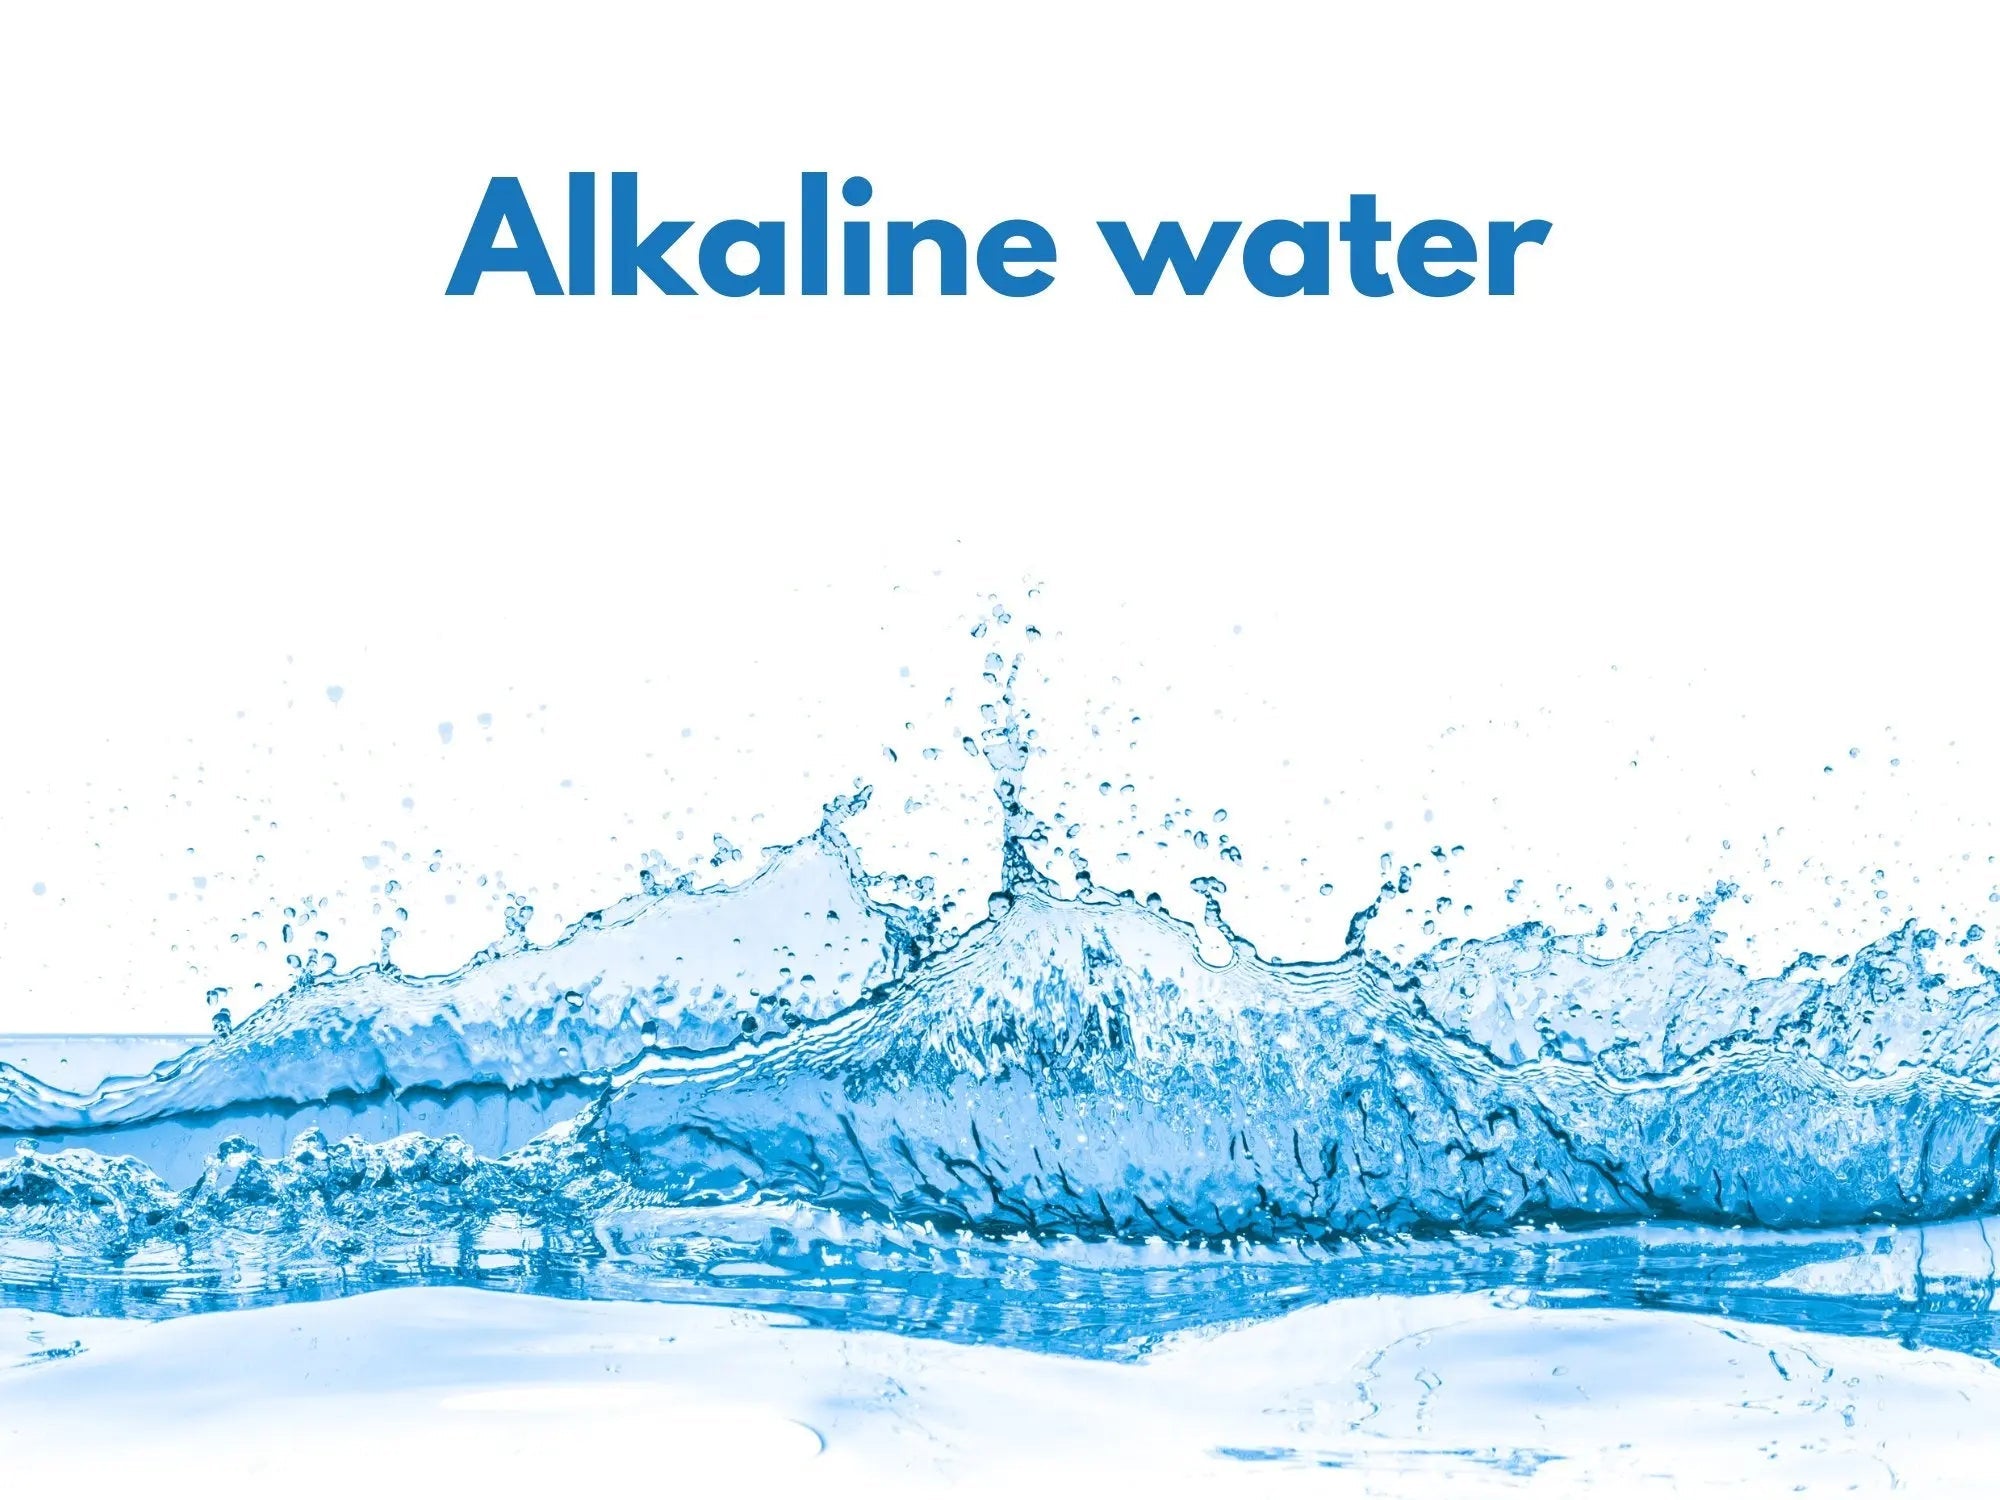 Alkaline water has been the subject of Nobel Prize-winning research - Pitcher of Life